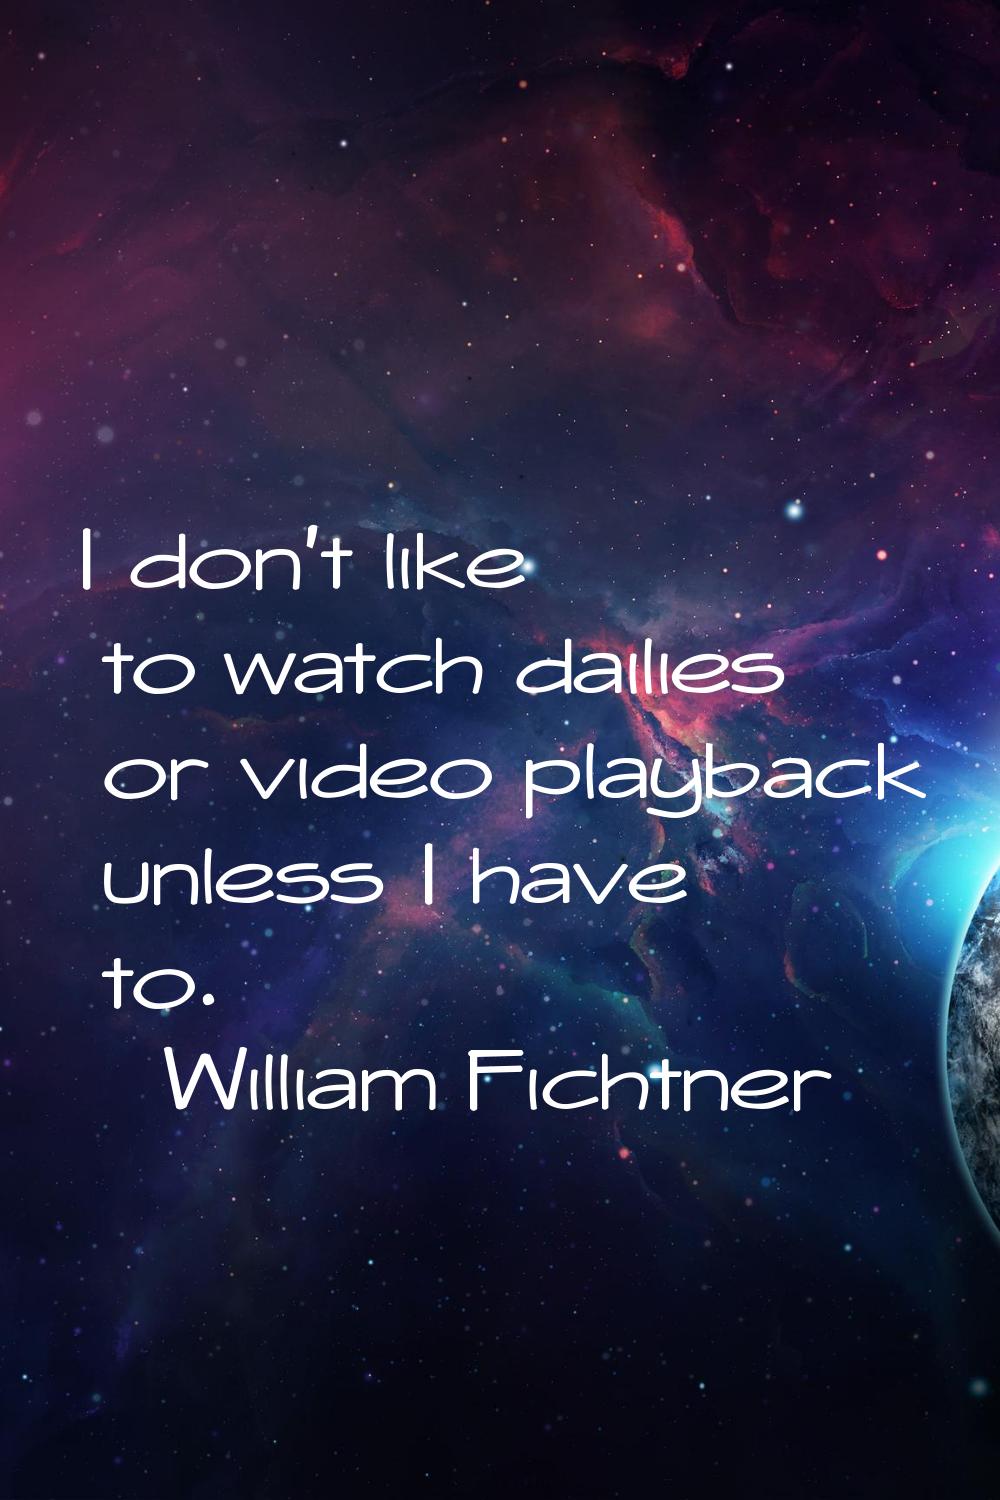 I don't like to watch dailies or video playback unless I have to.